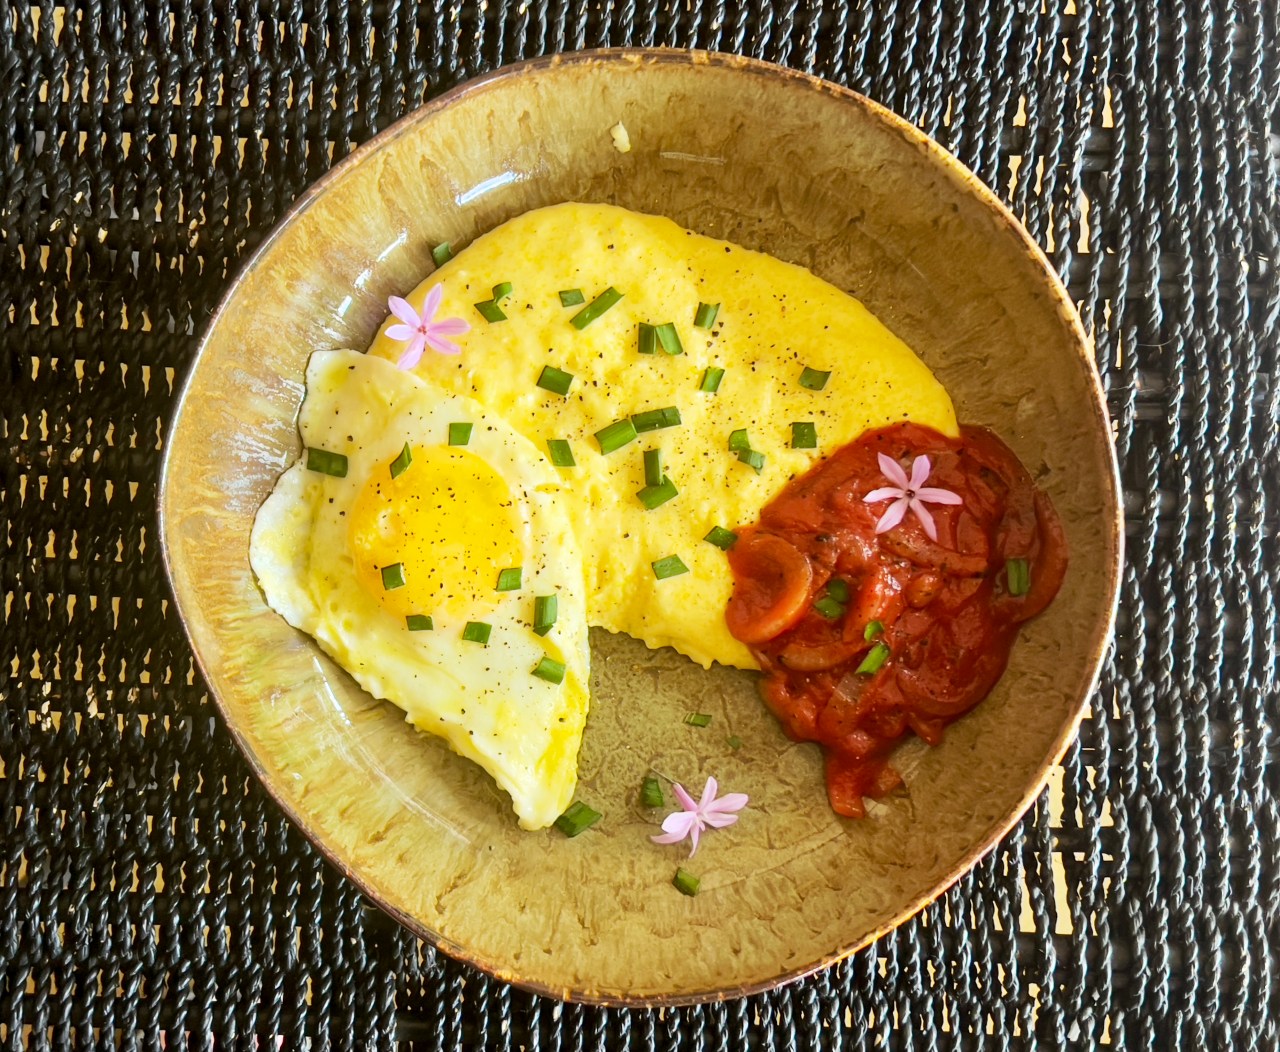 WHAT’S COOKING: Lekker Brekker Monday: Cheesy polenta with a fried egg andamp; onion-tomato relish